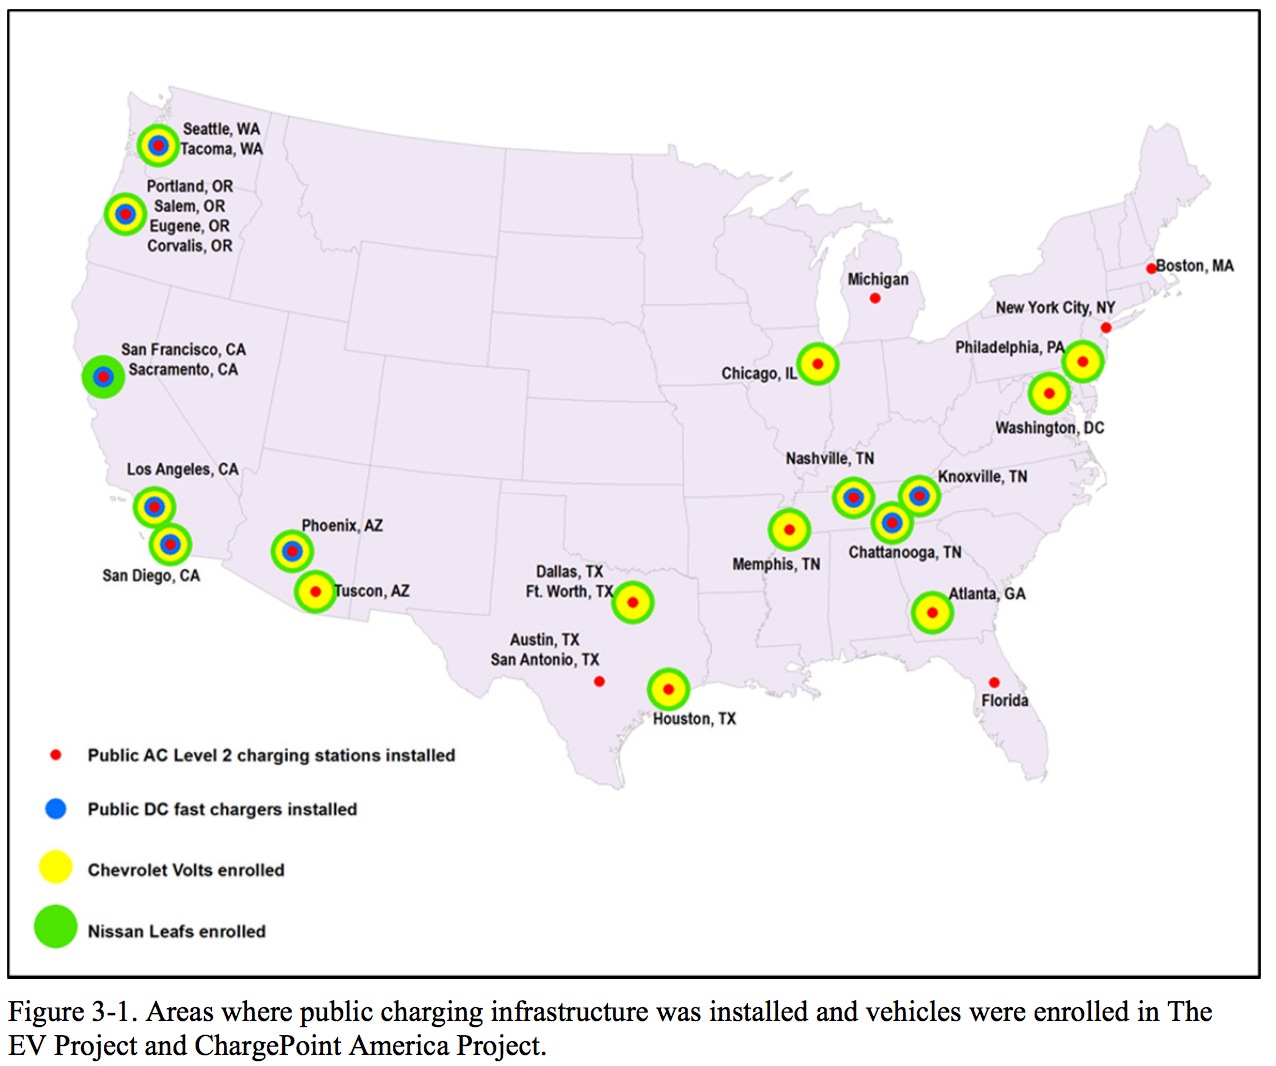 Figure 3-1. Areas where public charging infrastructure was installed and vehicles were enrolled in The EV Project and ChargePoint America Project. 